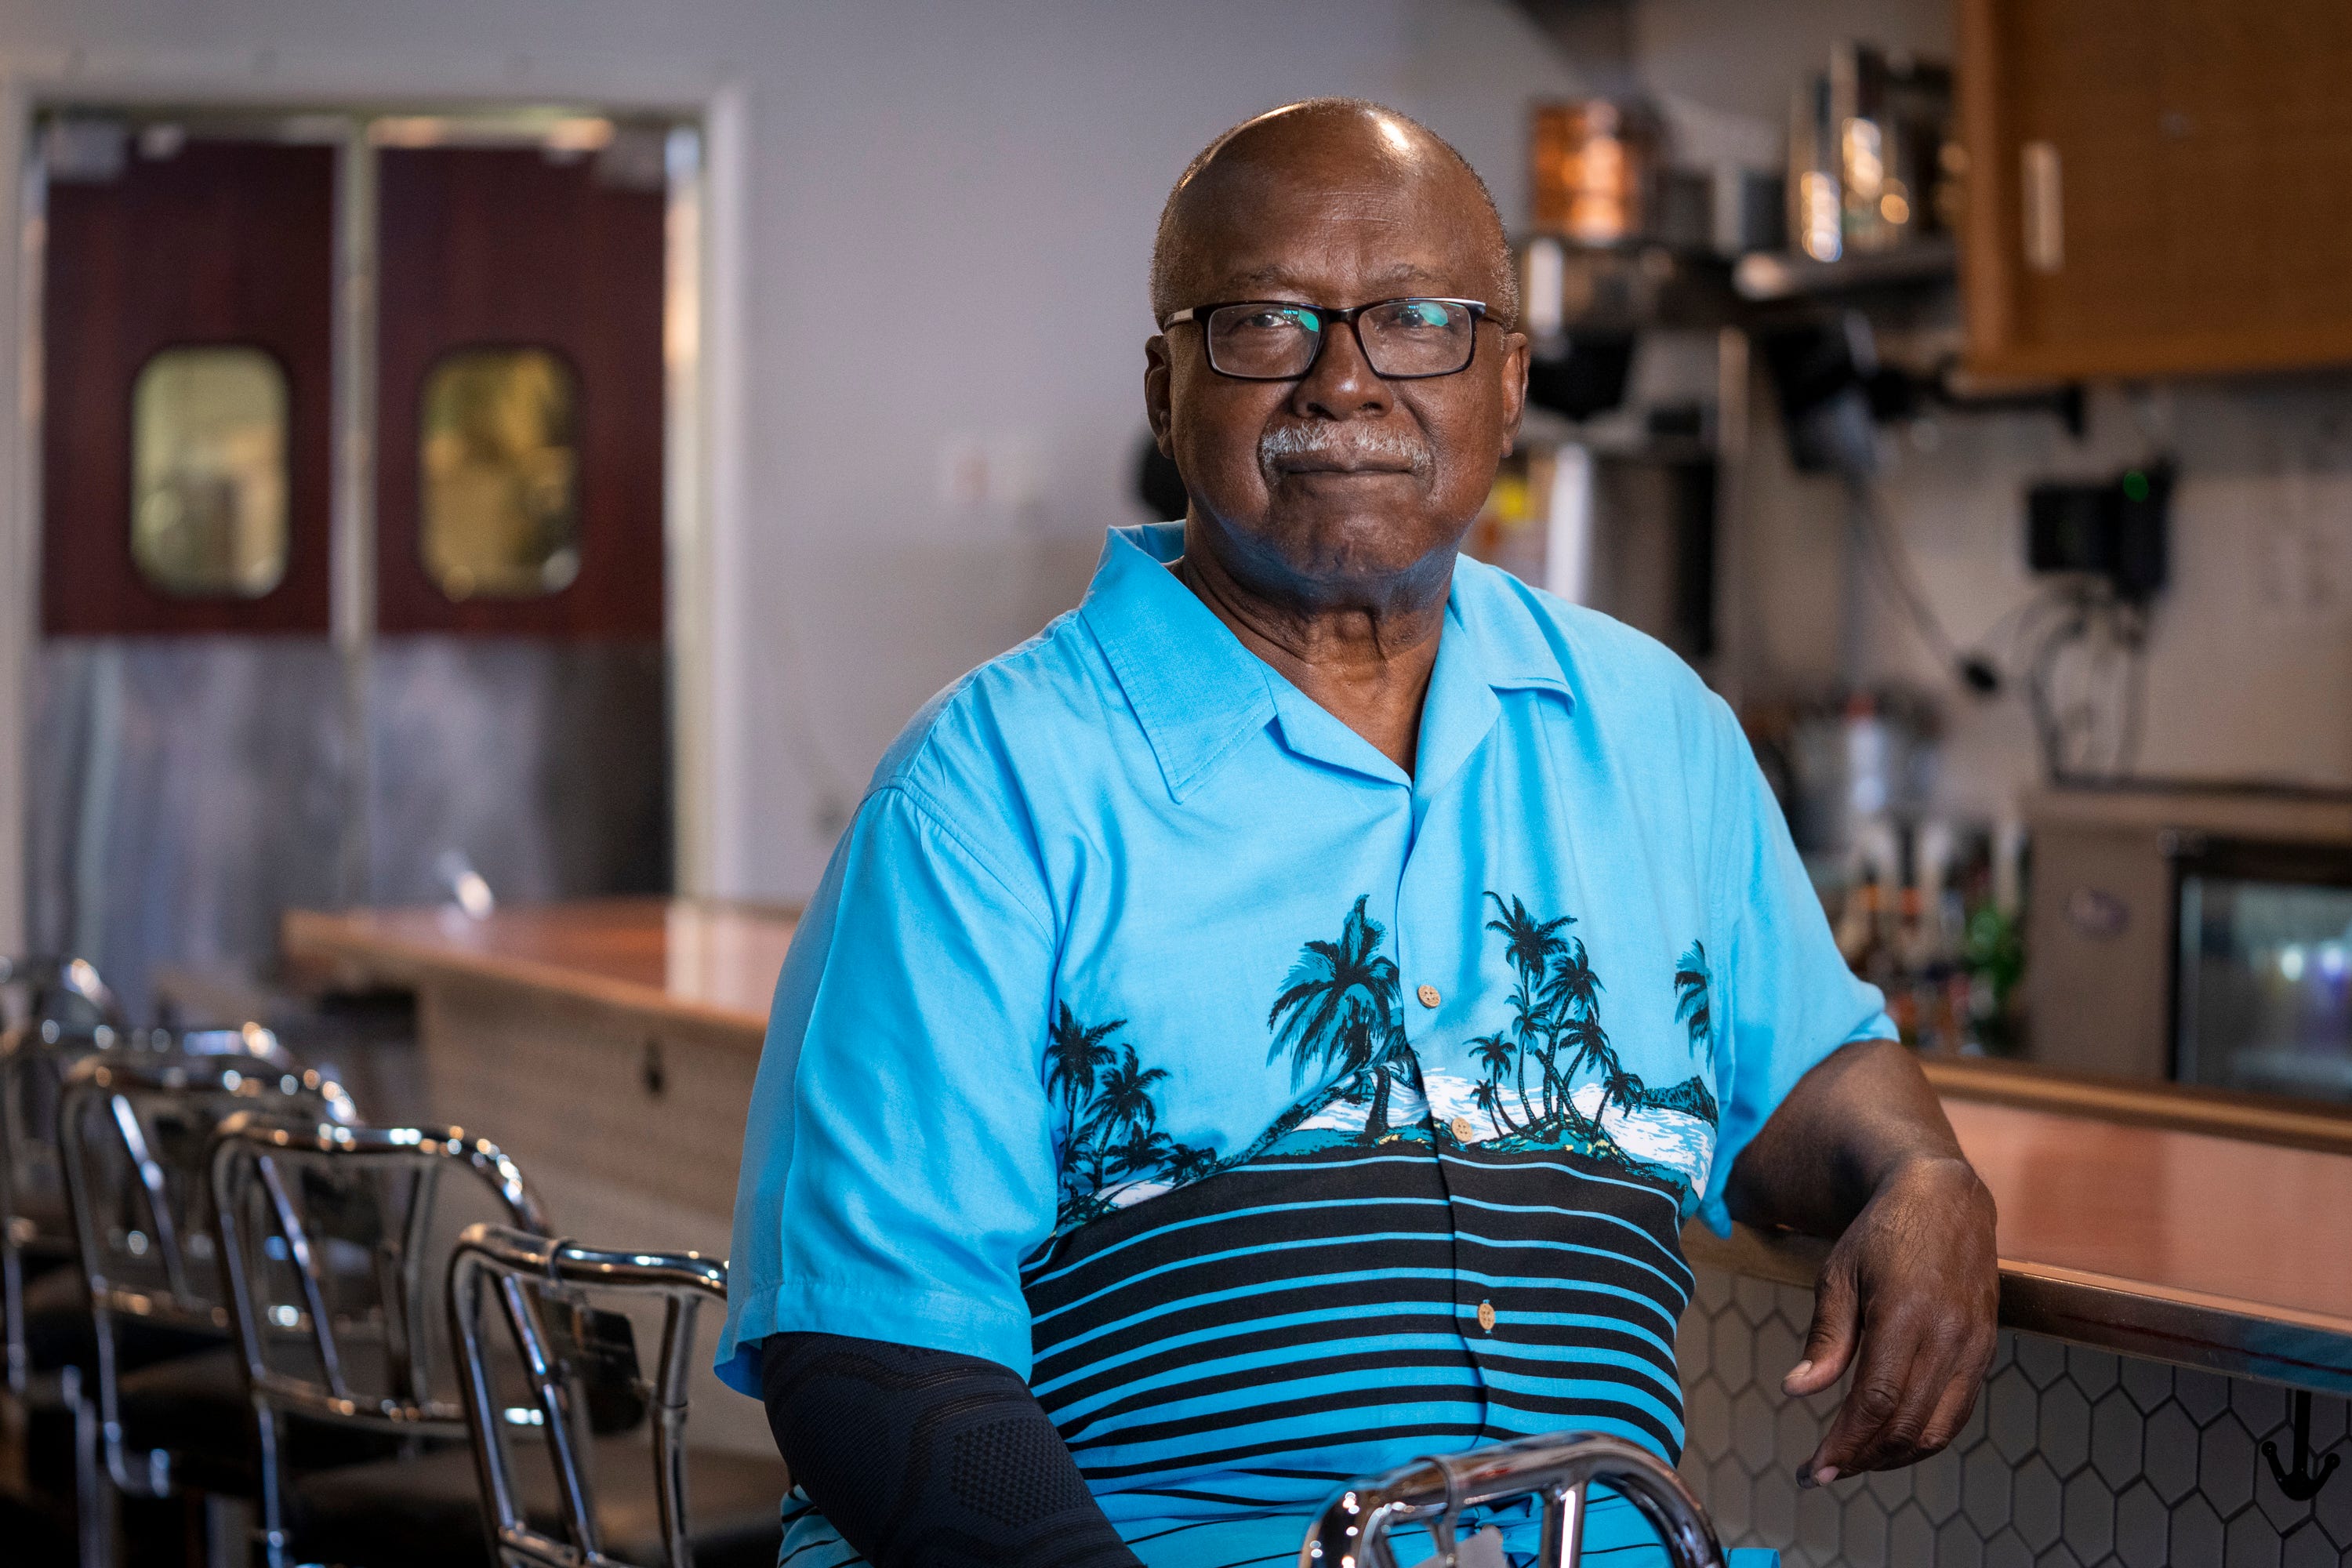 David Williamson, one of the Friendship Nine, sits for a portrait at the original McCrory's lunch counter, restored and preserved by the owners of Kounter, in Rock Hill, S.C. on August 12, 2021. On February 1, 1961, ten young civil rights activists were convicted of trespassing for staging a sit-in at a department store lunch counter in Rock Hill, South Carolina. The judge imposed a fine of $100 each or 30 days hard labor on a chain gang. The activists opted for jail time, setting in motion the movement’s "Jail-No-Bail'' strategy to push back against paying fines for fighting segregation. Experts said the strategy became a key tactic in the civil rights movement, including one used by the Freedom Riders. It also draws some parallels to the debate today over the disparate impact of the bail system on people of color, experts and veteran said.